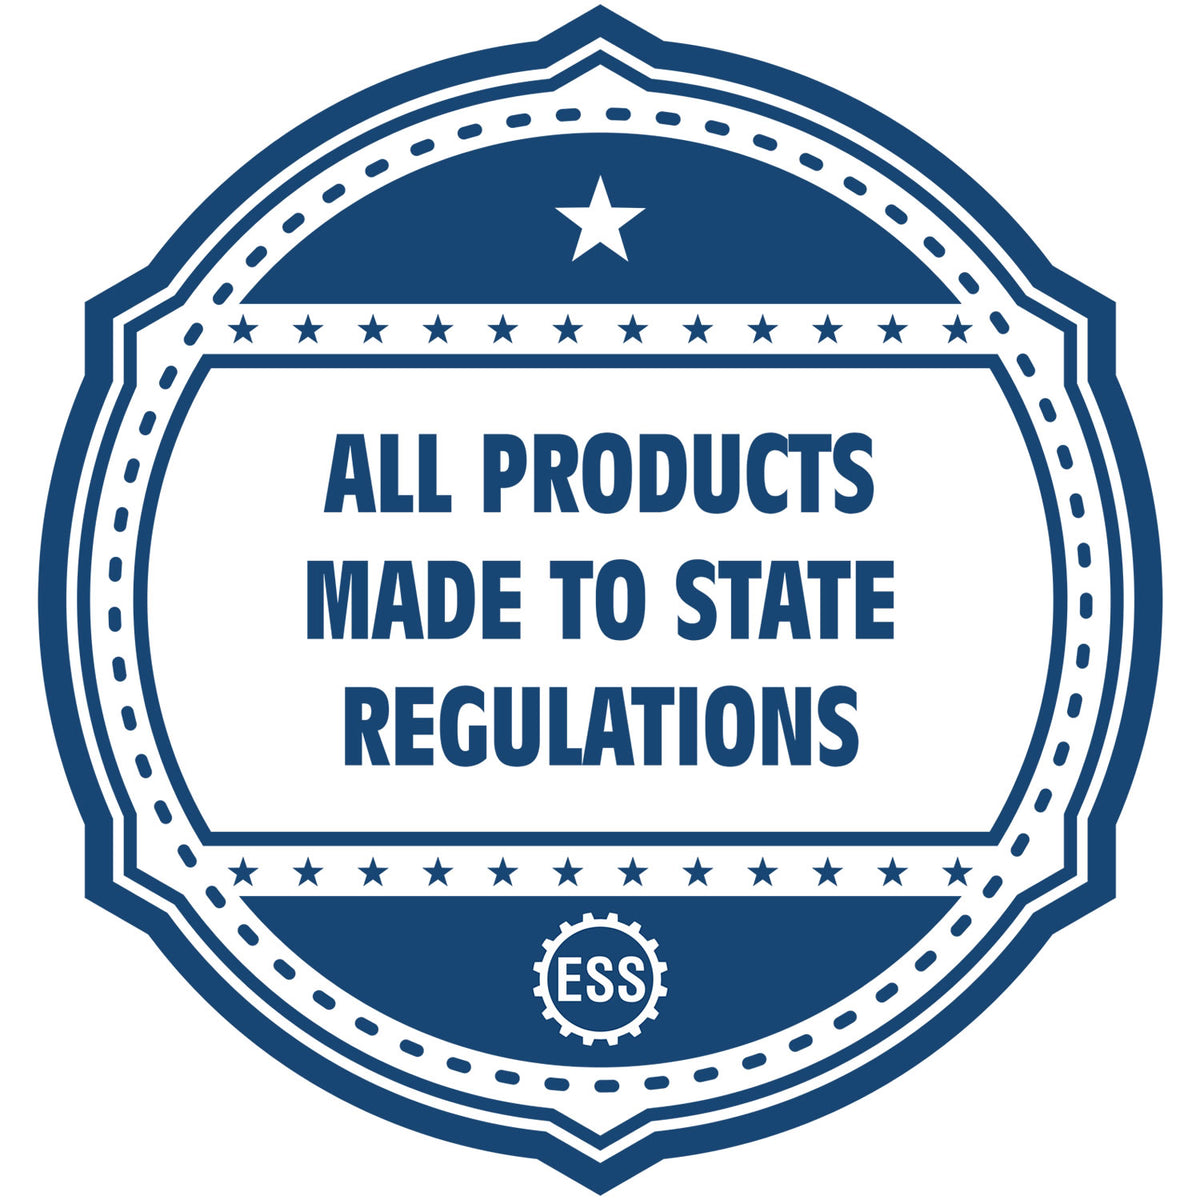 An icon or badge element for the Idaho Professional Engineer Seal Stamp showing that this product is made in compliance with state regulations.